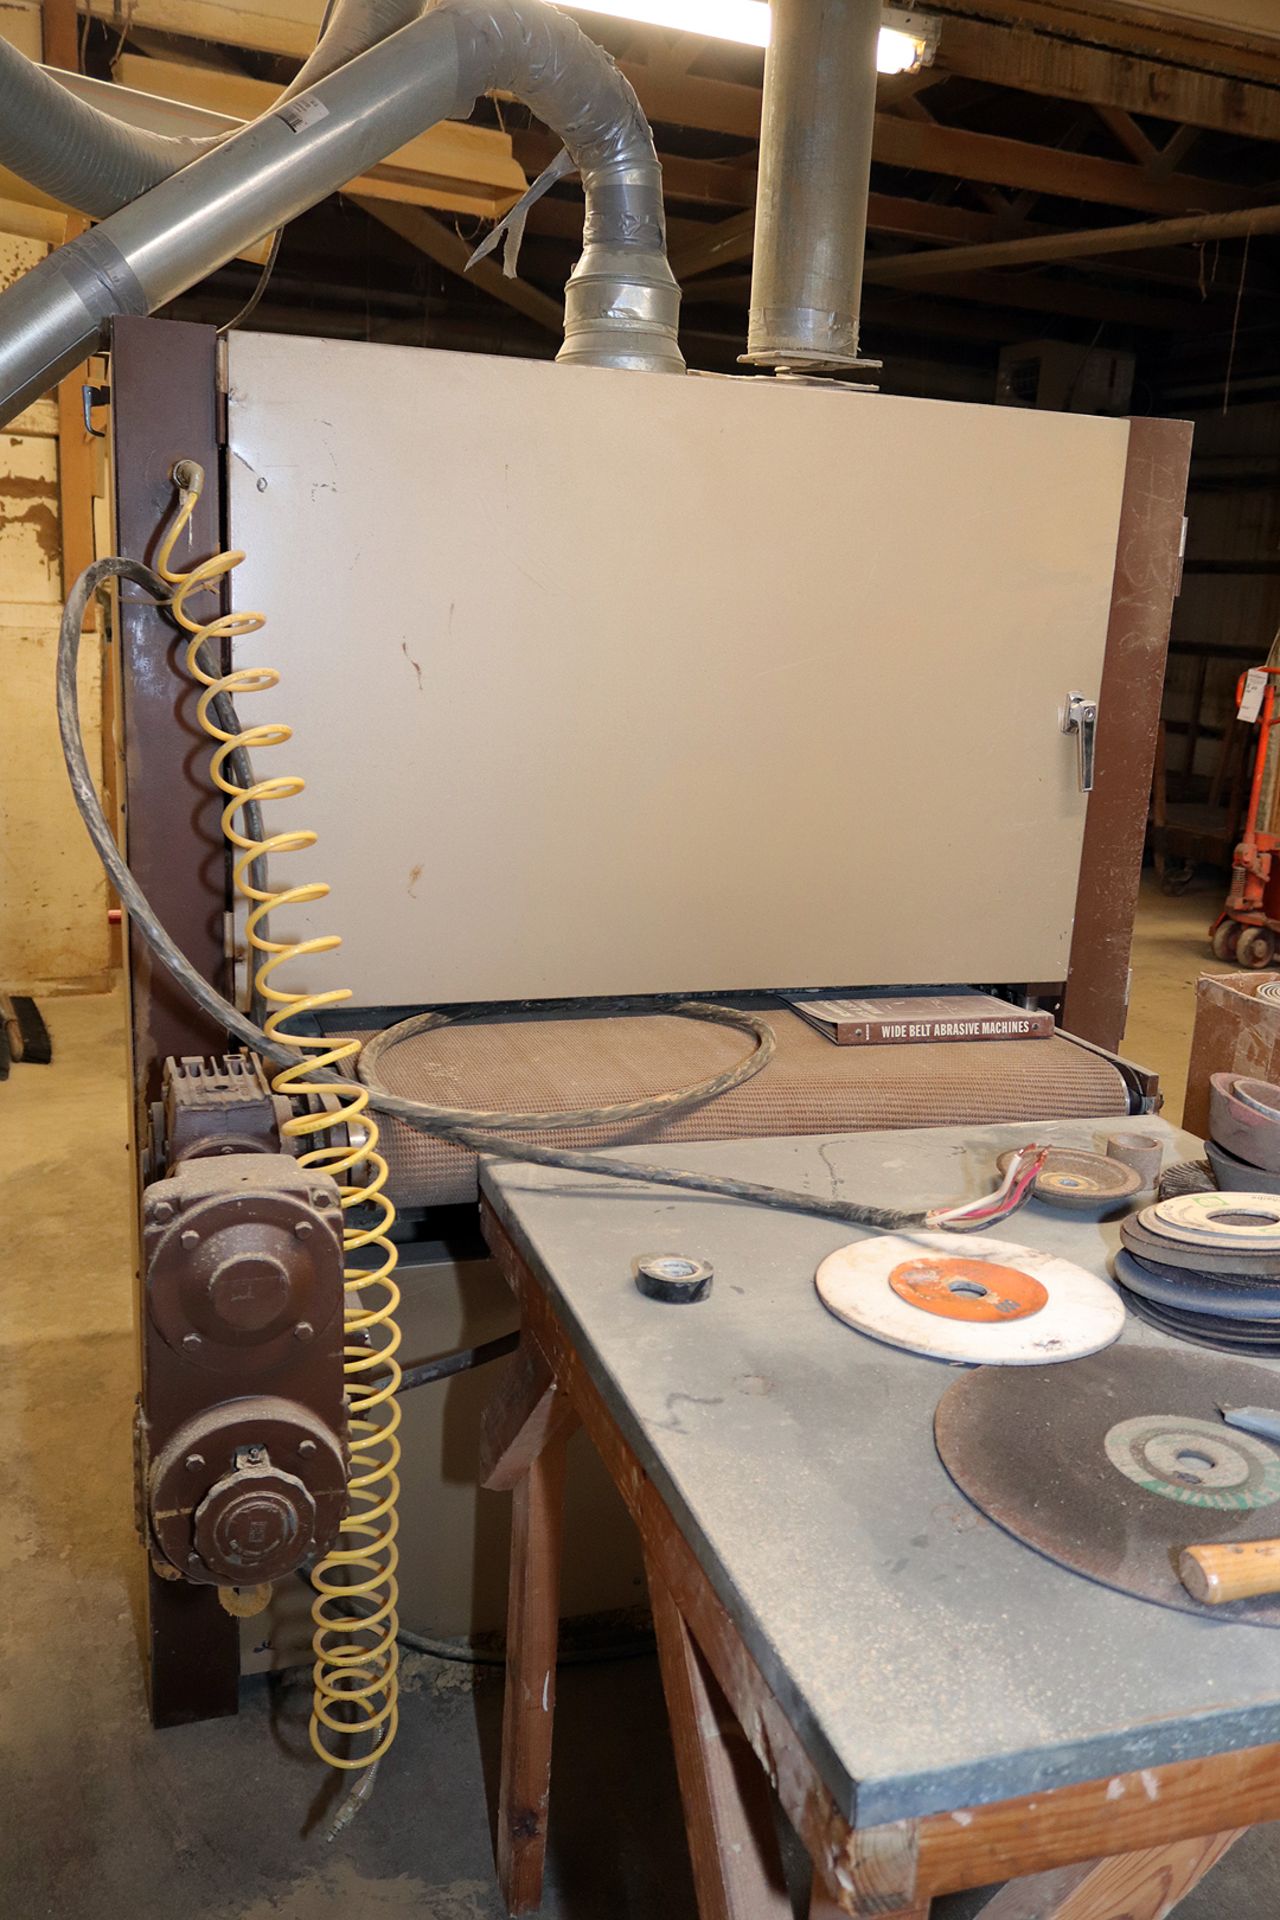 Ramco wide belt sander, model 37T 60, electronic eye is not working and 1 roller needs to be - Image 8 of 9